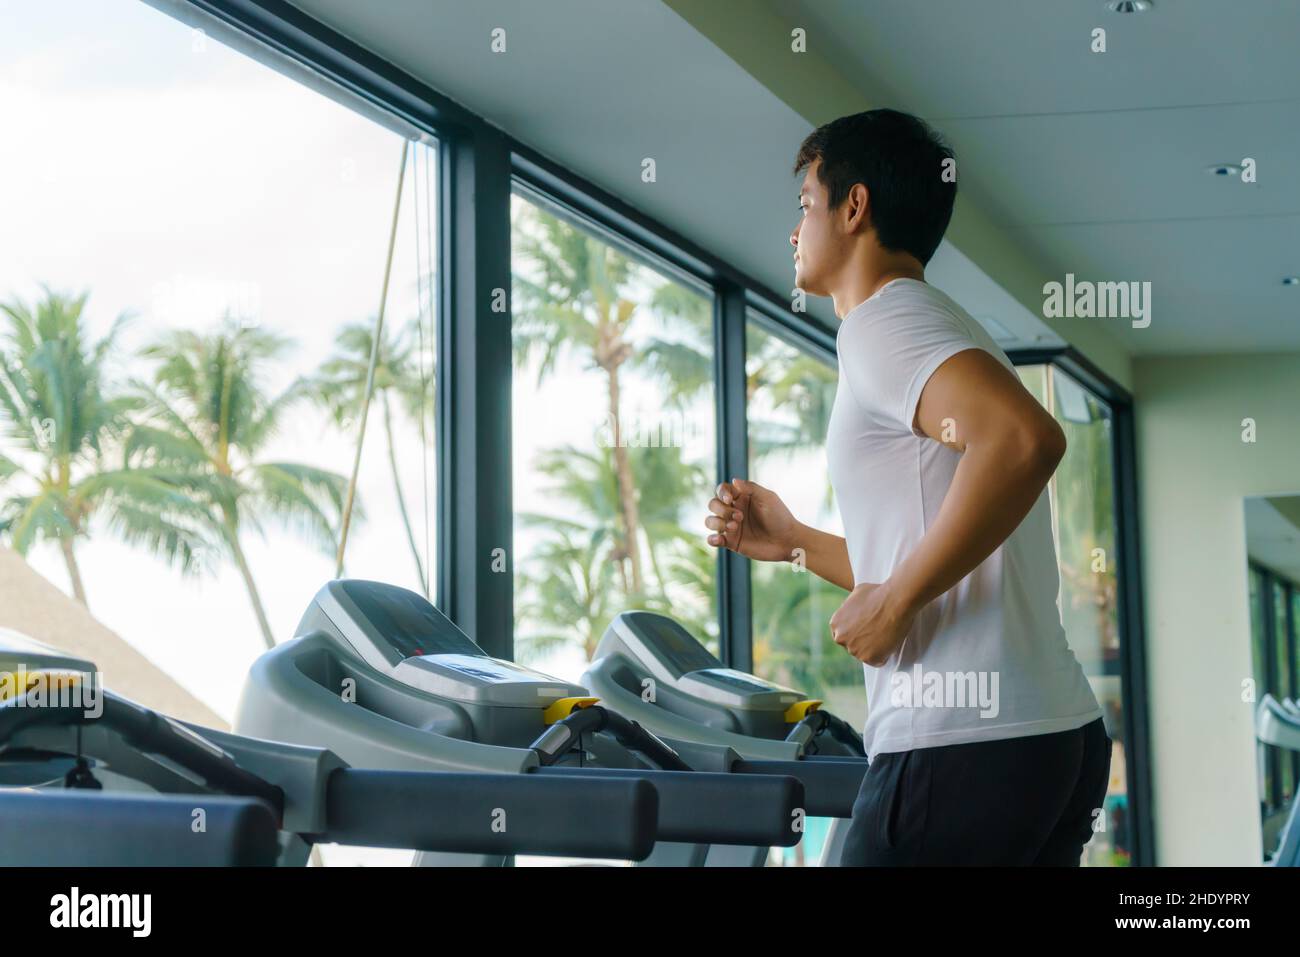 Asian man working out on a treadmill at a resort fitness center in the morning. Stock Photo